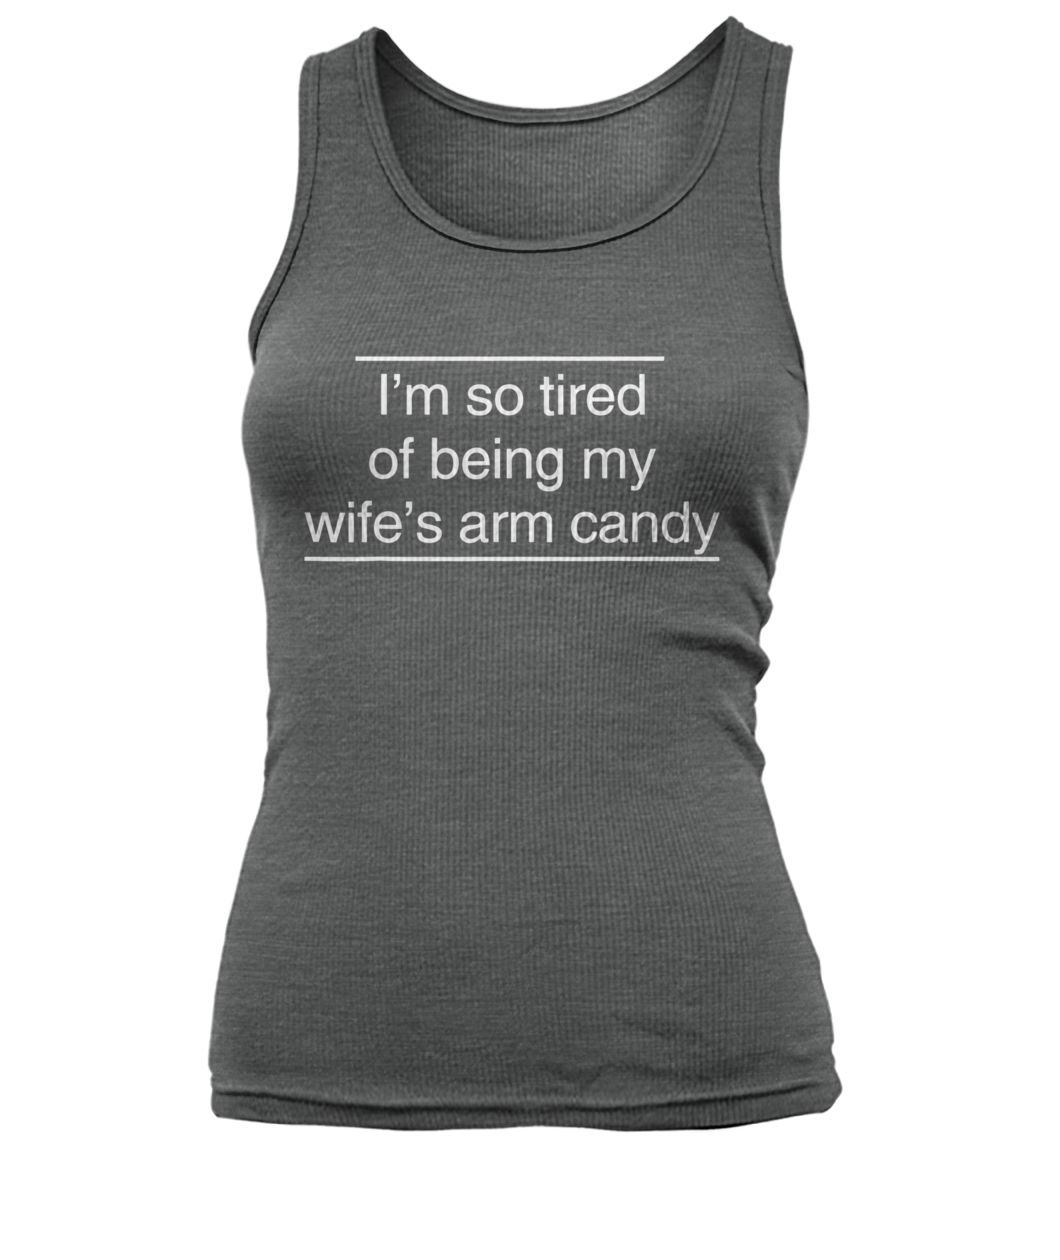 I'm tired of being my wife's arm candy women's tank top